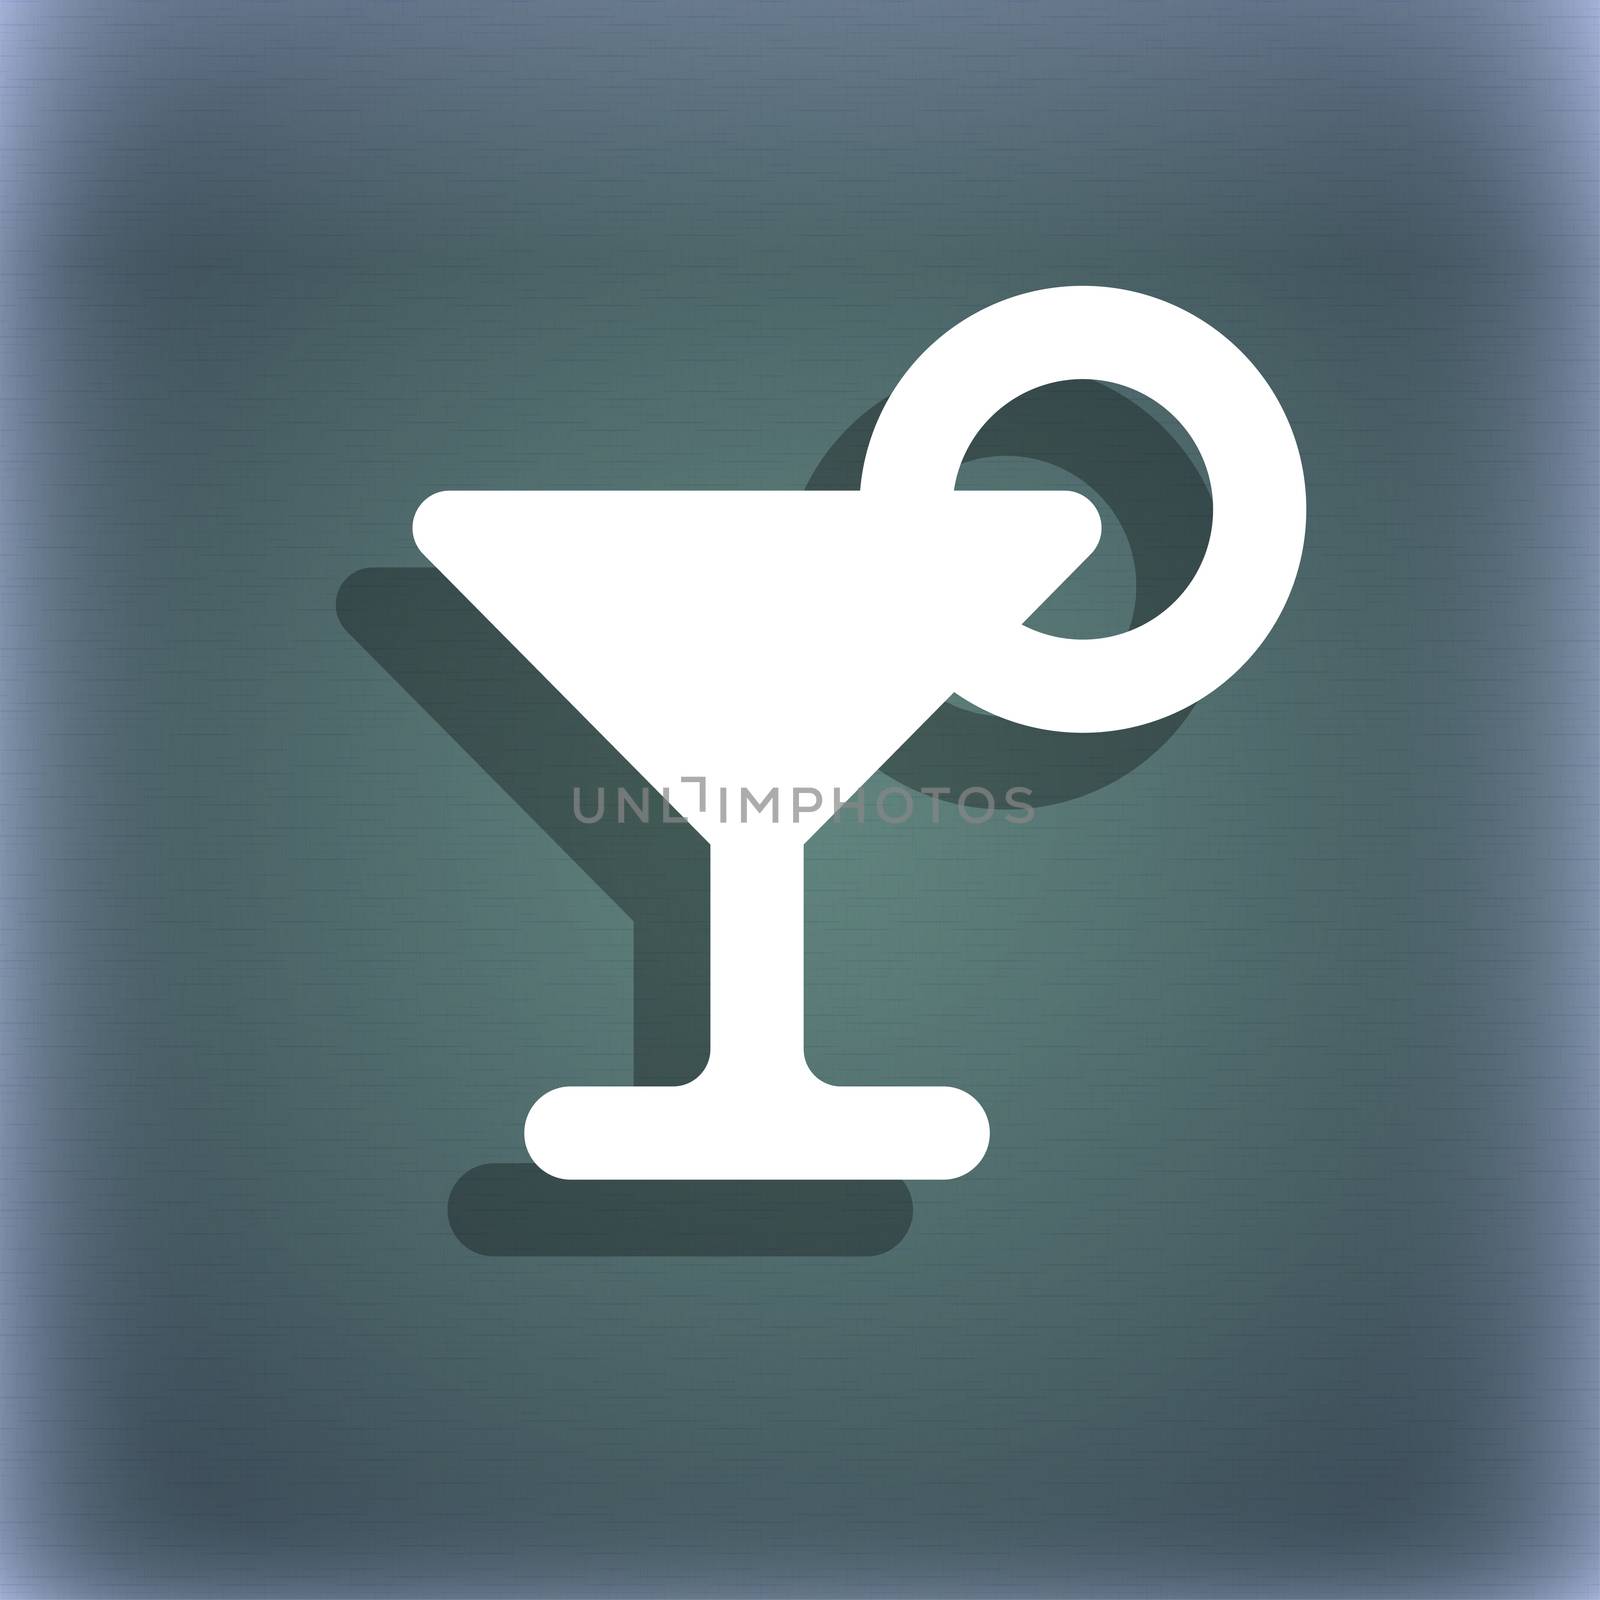 Drink, cocktail with a lemon icon symbol on the blue-green abstract background with shadow and space for your text.  by serhii_lohvyniuk